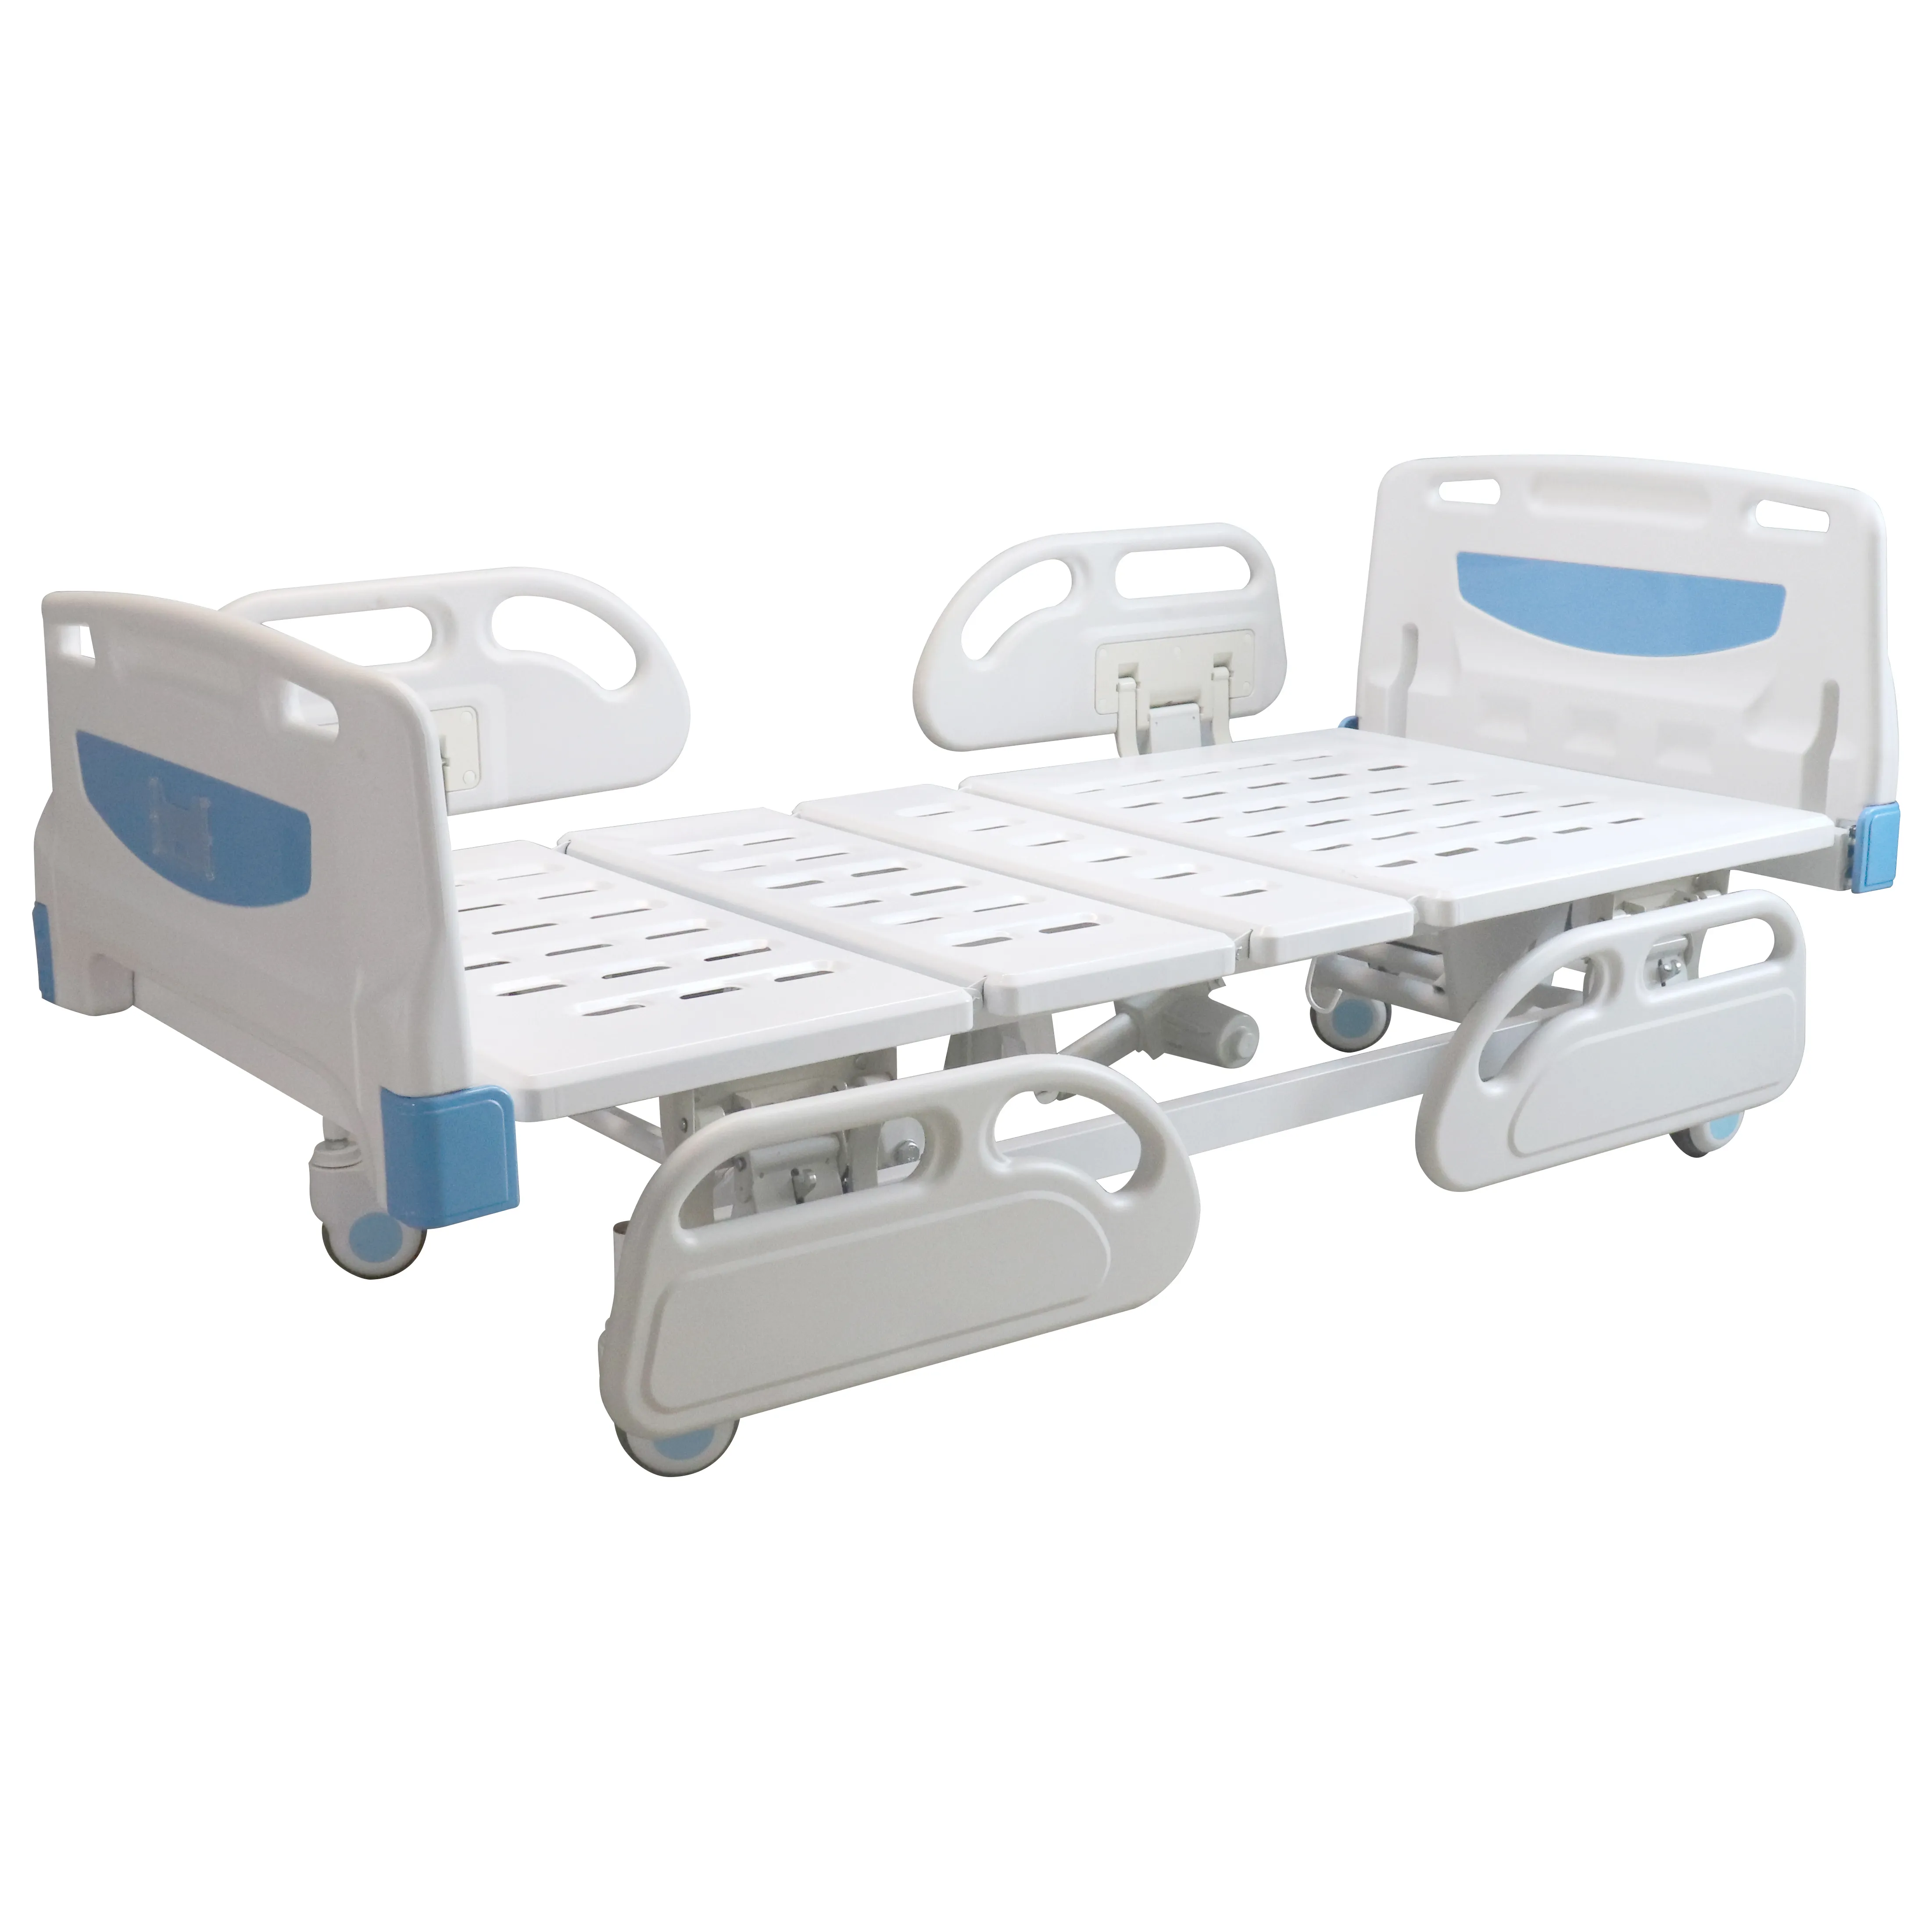 ORP-BE57 Five Functions Electric Medical Bed Multiple Functions Recovery Hill Rom Hospital Beds For Sale